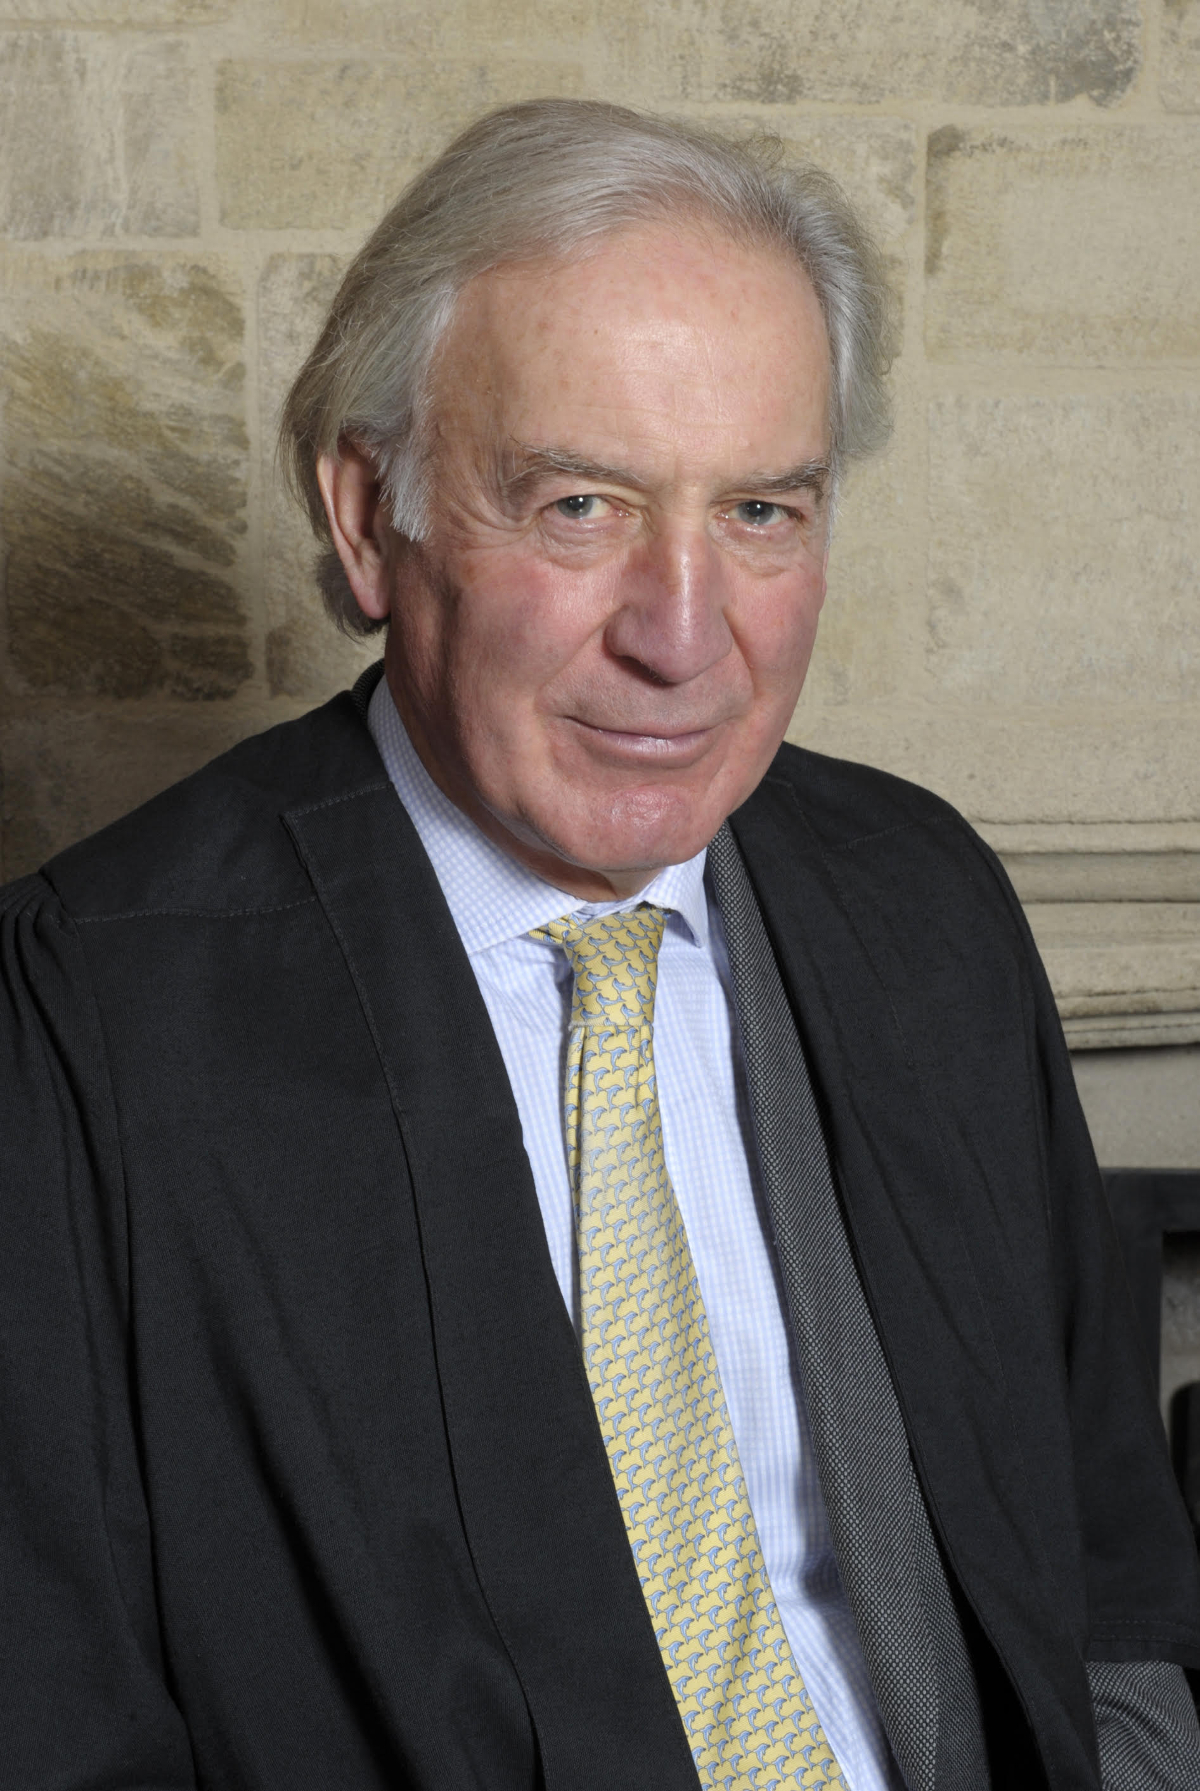 Lord Glennie appointed judge of Dubai financial court